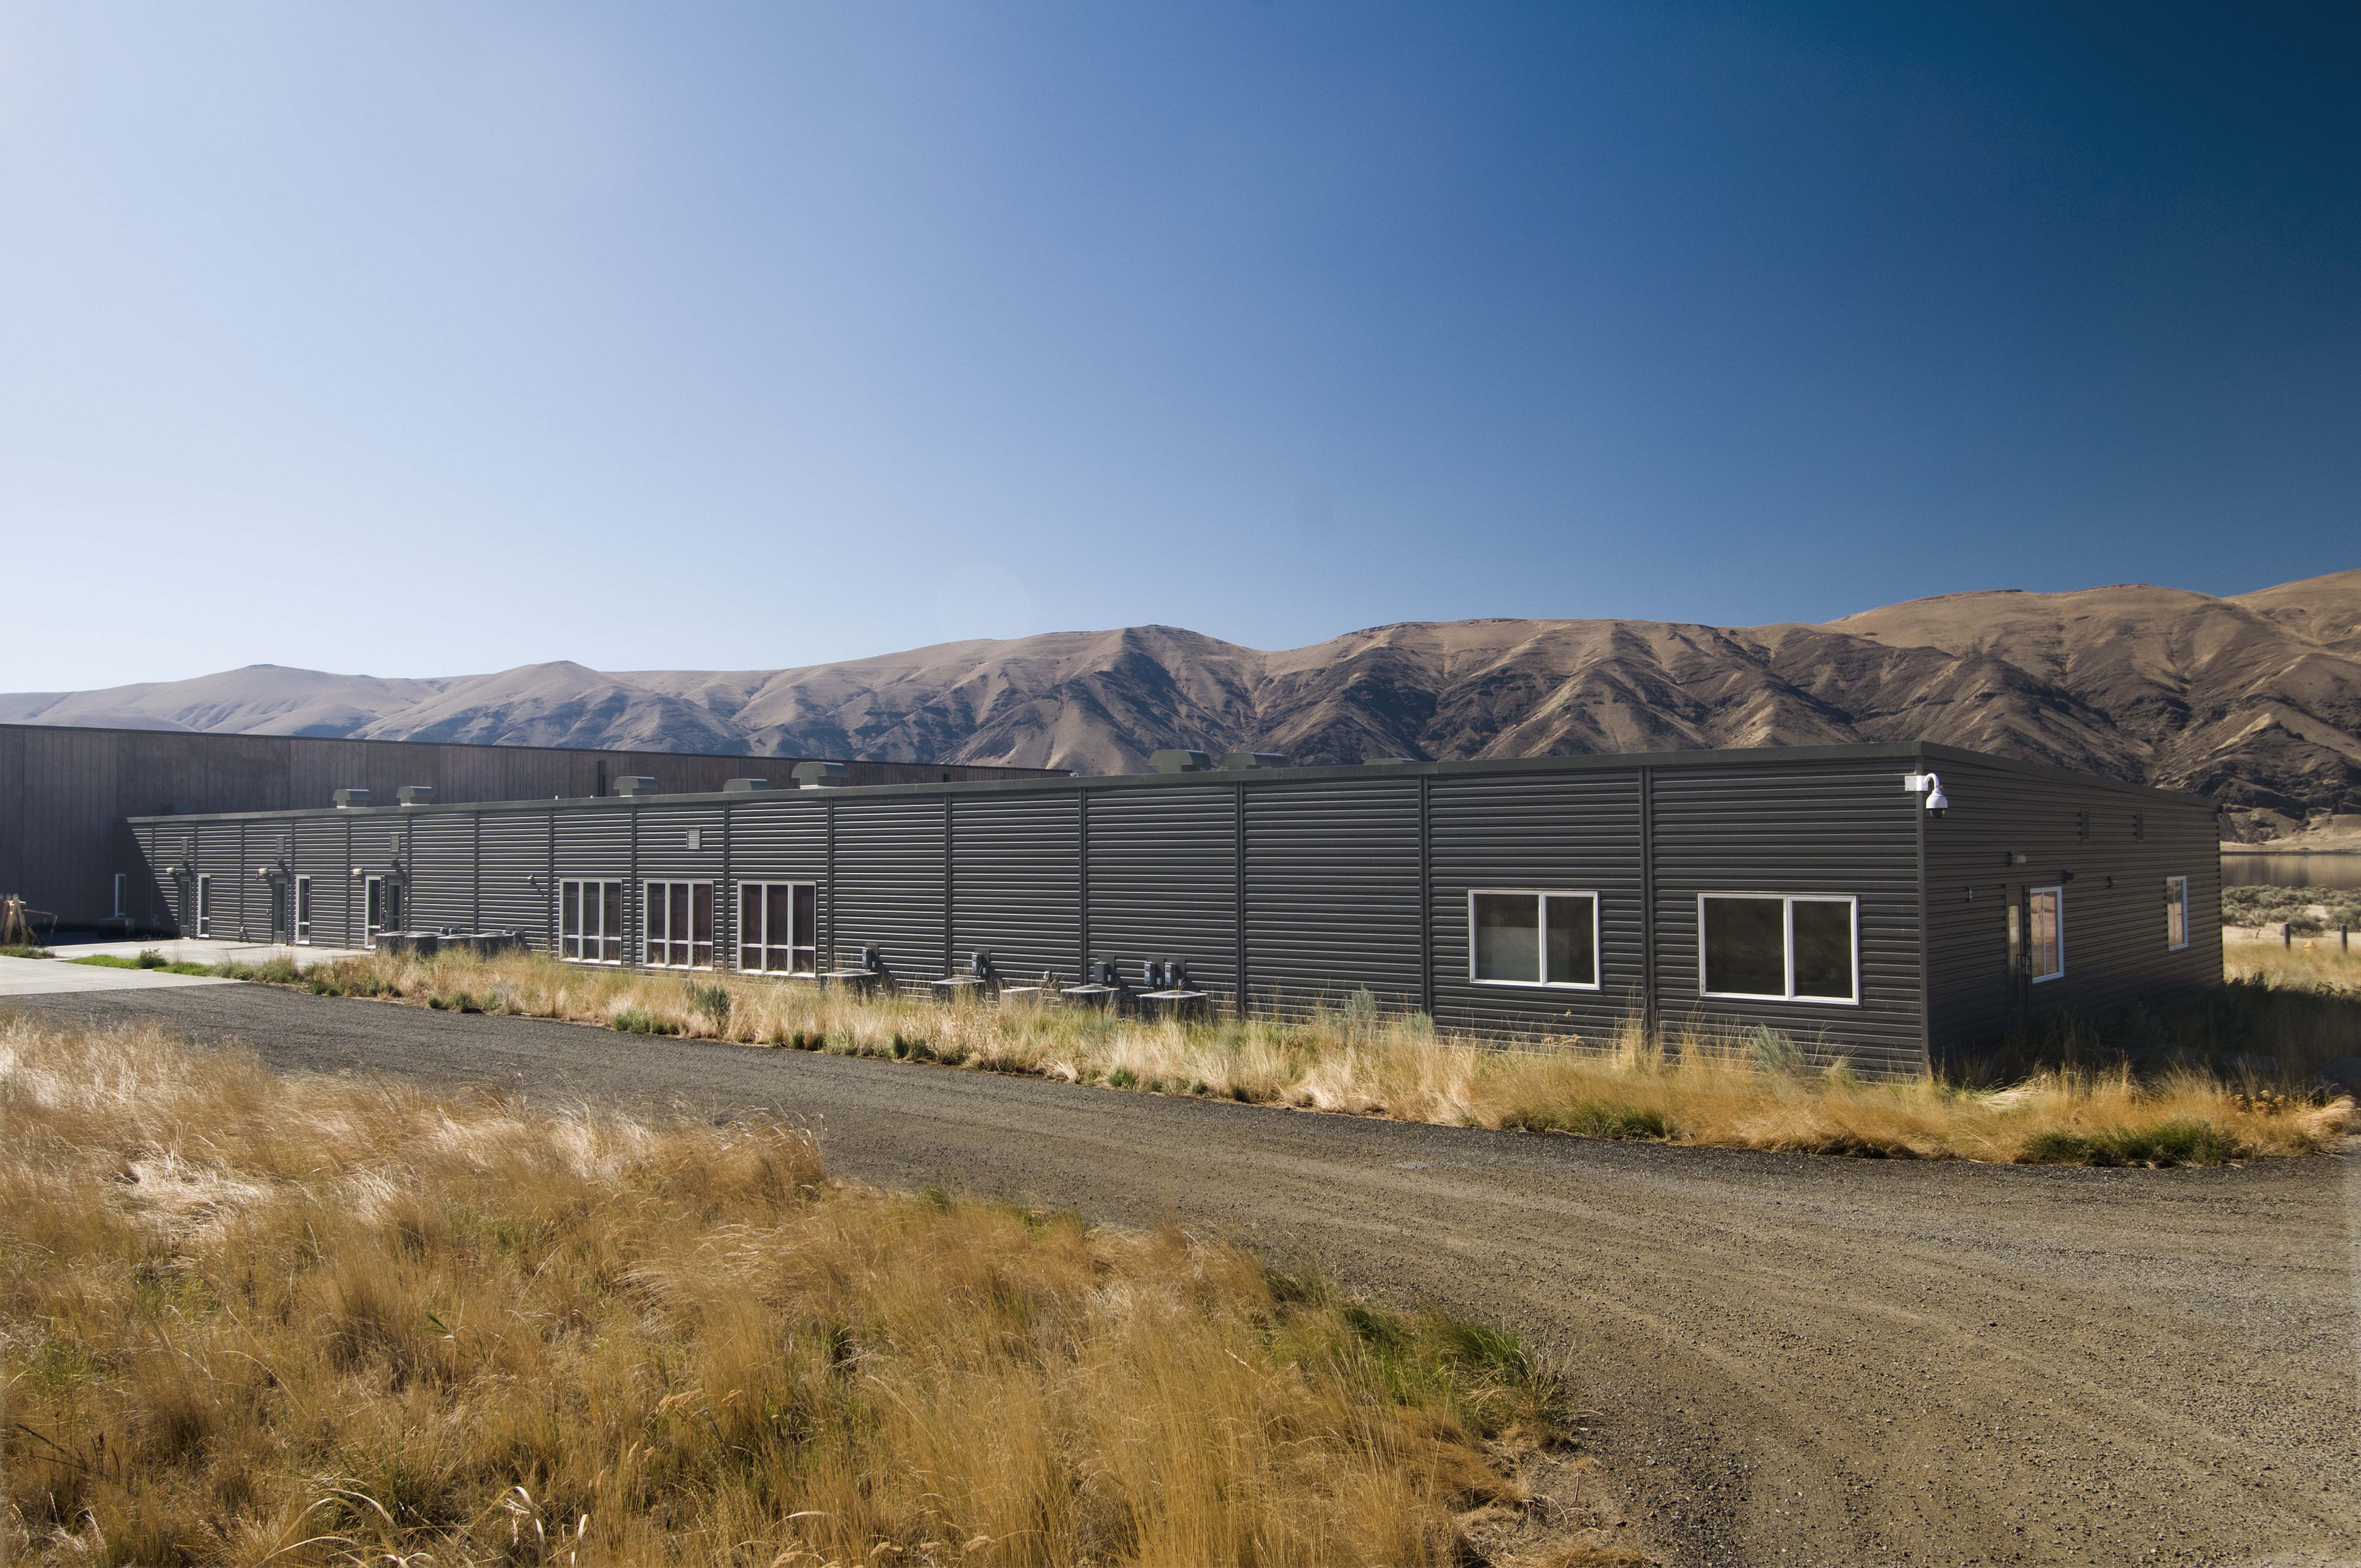 Wanapum Hertiage Center: traditional and modular construction work together to share a culture with present and future generations.